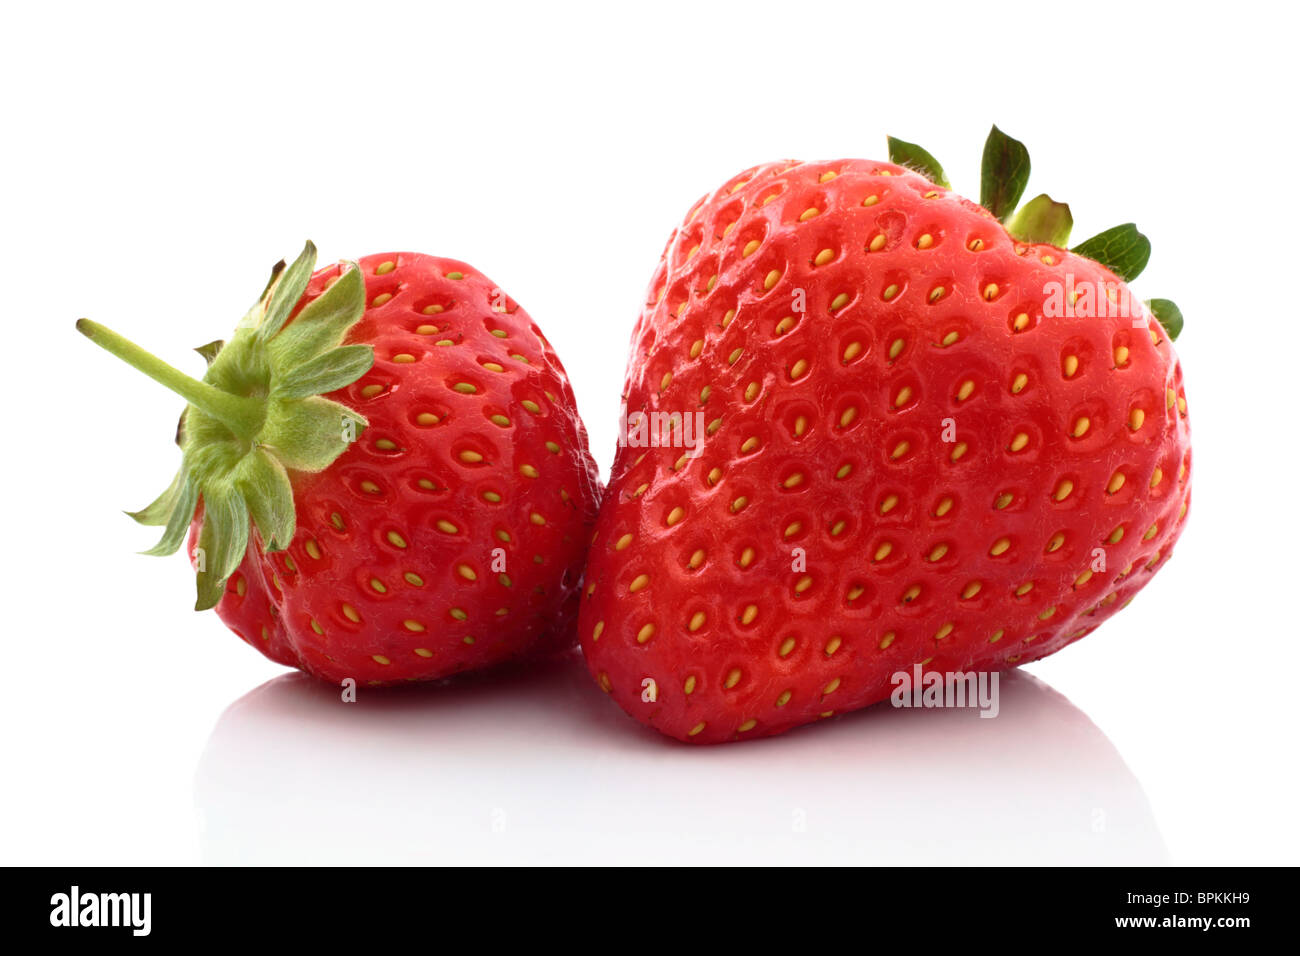 Two fresh strawberries close up with a reflection on a white background. Stock Photo